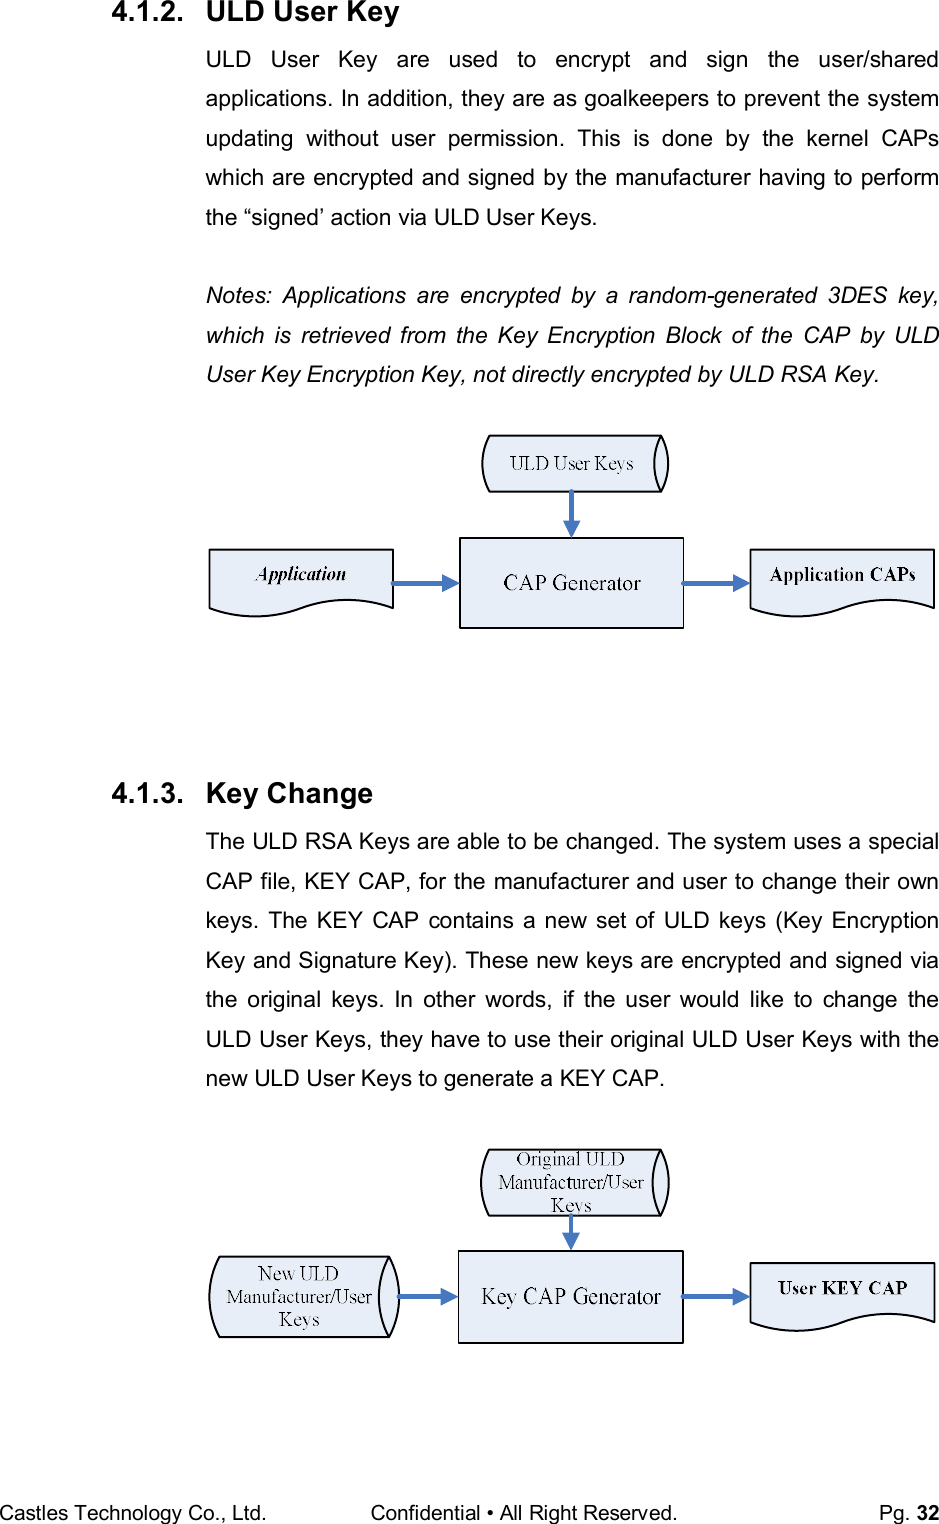 Castles Technology Co., Ltd. Confidential • All Right Reserved.  Pg. 32 4.1.2.  ULD User Key ULD  User  Key  are  used  to  encrypt  and  sign  the  user/shared applications. In addition, they are as goalkeepers to prevent the system updating  without  user  permission.  This  is  done  by  the  kernel  CAPs which are encrypted and signed by the manufacturer having to perform the “signed’ action via ULD User Keys.  Notes:  Applications  are  encrypted  by  a  random-generated  3DES  key, which  is  retrieved  from  the  Key  Encryption  Block  of  the  CAP  by  ULD User Key Encryption Key, not directly encrypted by ULD RSA Key.       4.1.3.  Key Change The ULD RSA Keys are able to be changed. The system uses a special CAP file, KEY CAP, for the manufacturer and user to change their own keys.  The  KEY  CAP  contains a new  set  of  ULD  keys  (Key  Encryption Key and Signature Key). These new keys are encrypted and signed via the  original  keys.  In  other  words,  if  the  user  would  like  to  change  the ULD User Keys, they have to use their original ULD User Keys with the new ULD User Keys to generate a KEY CAP.      